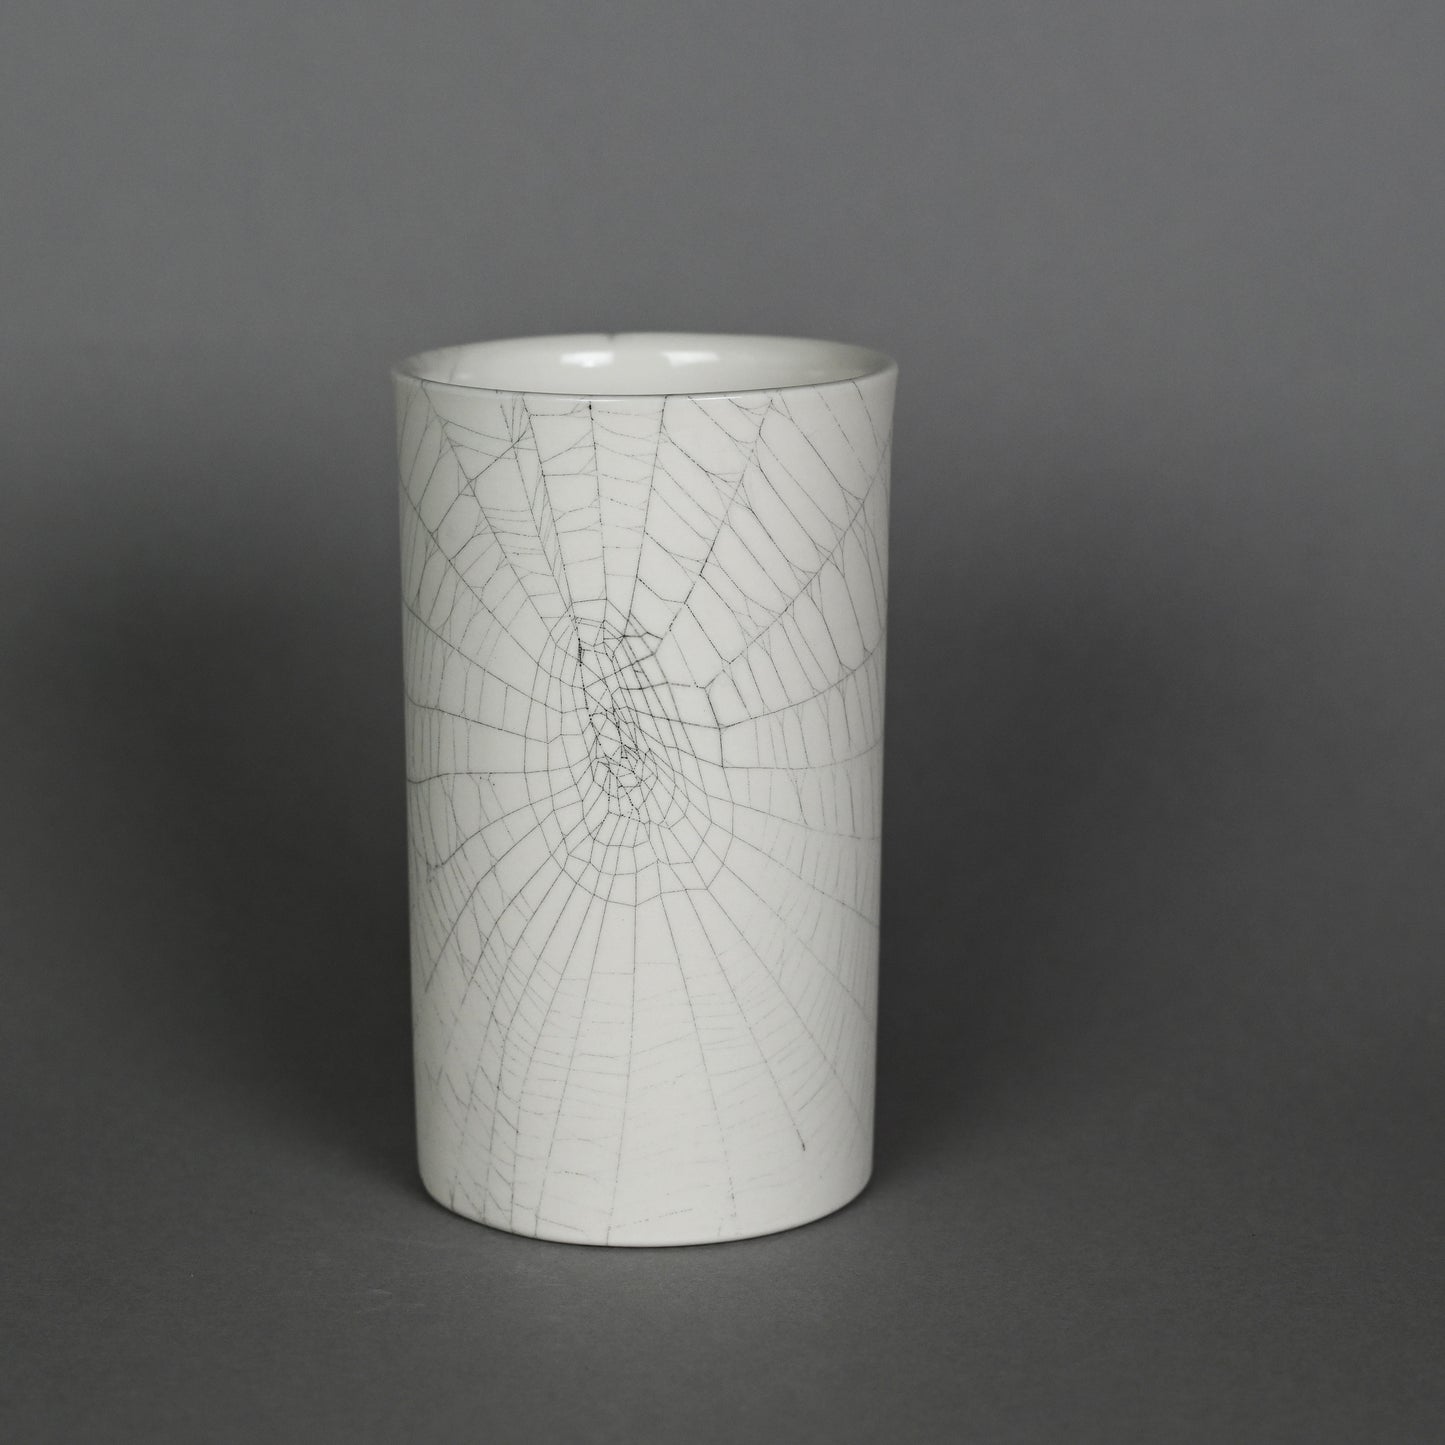 Web on Clay (201), Collected September 17, 2022